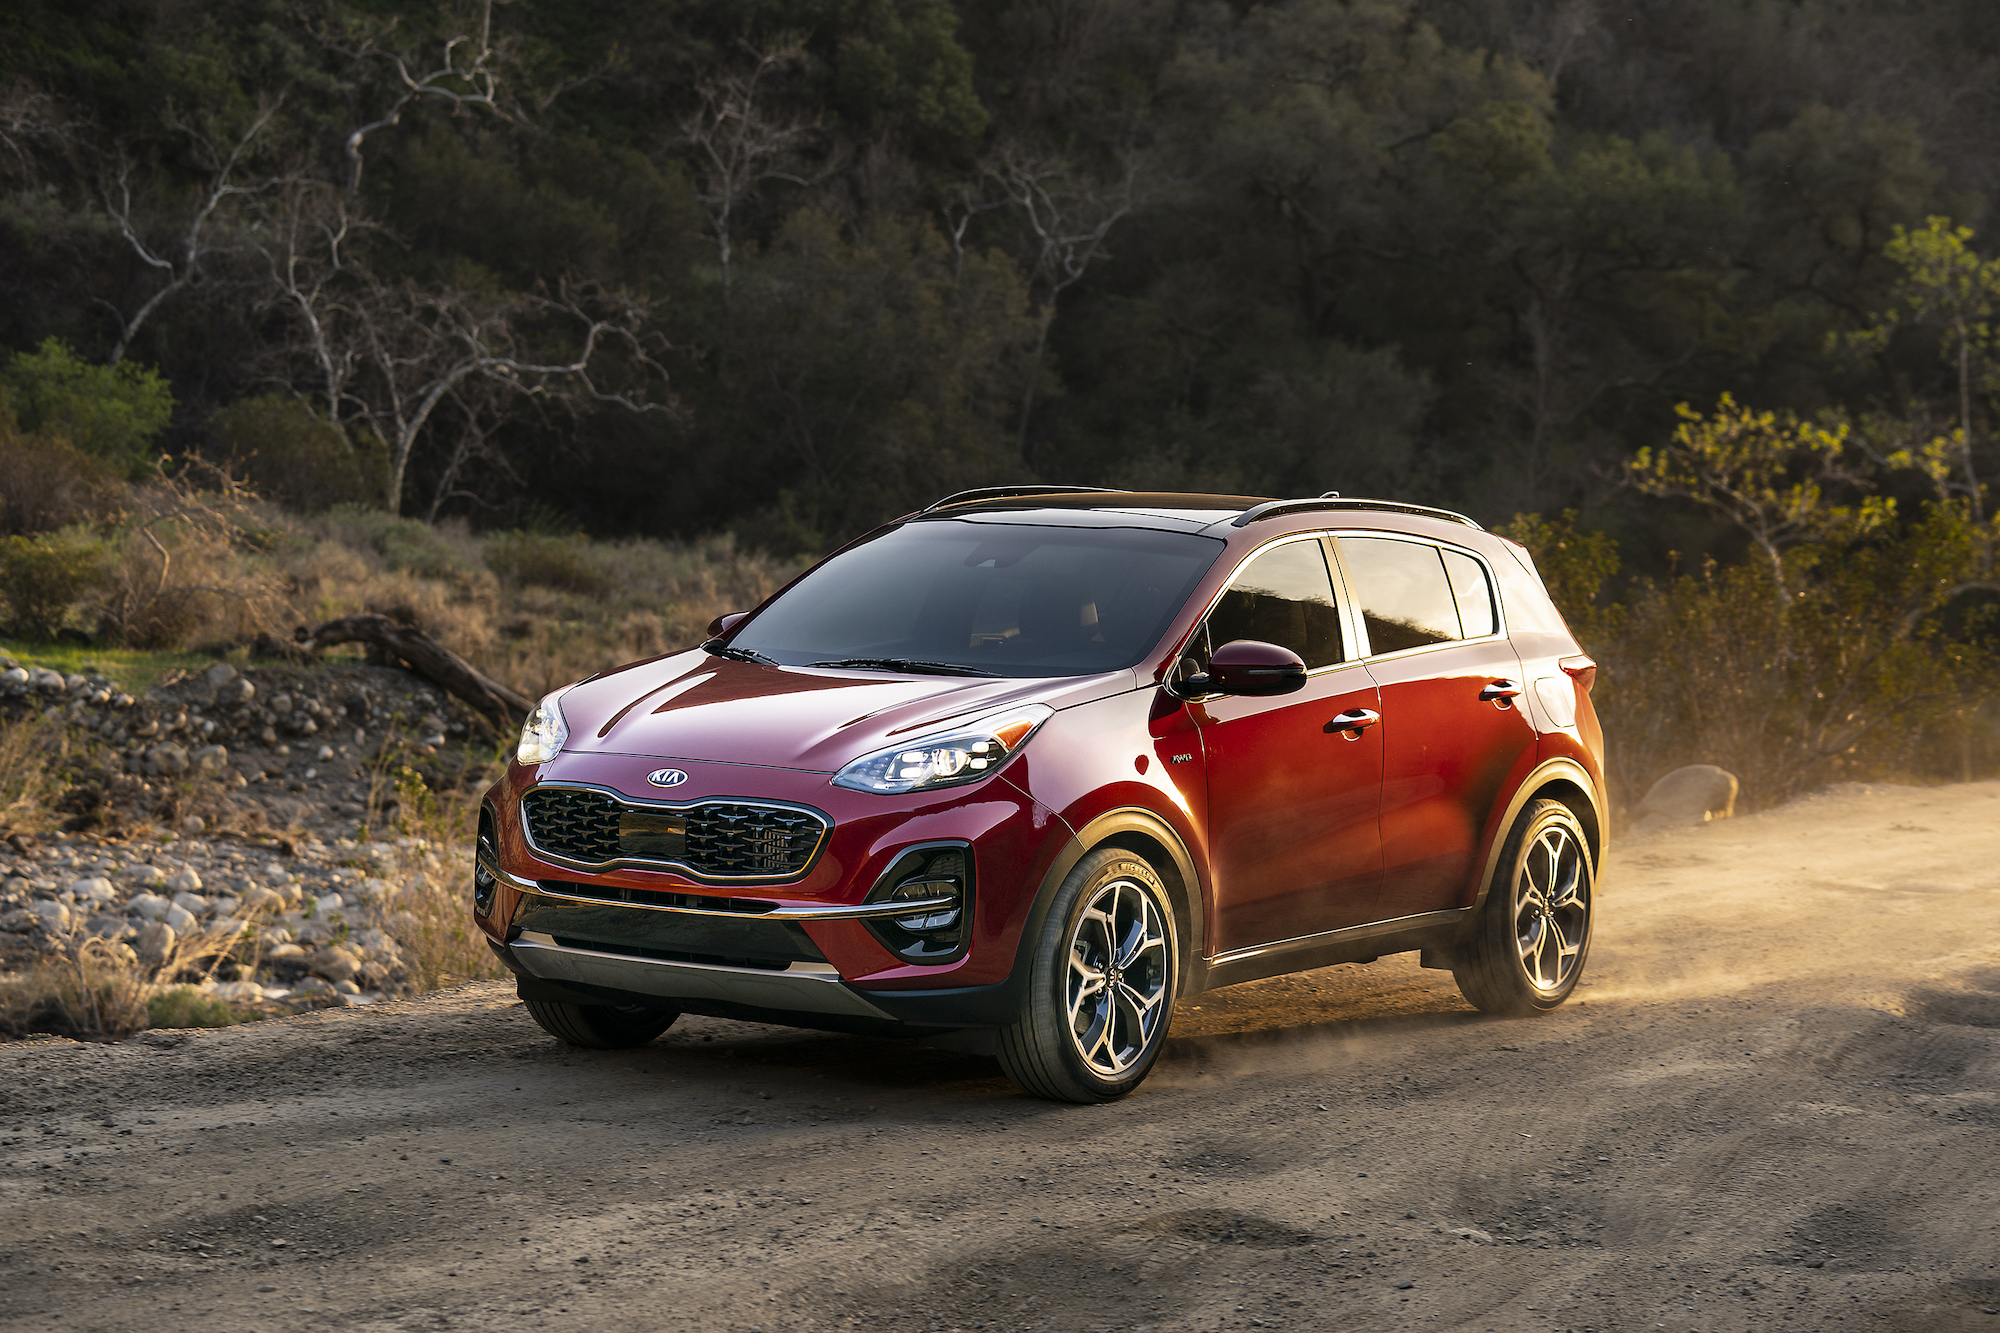 A dark-red 2021 Kia Sportage crossover SUV drives on a dusty road